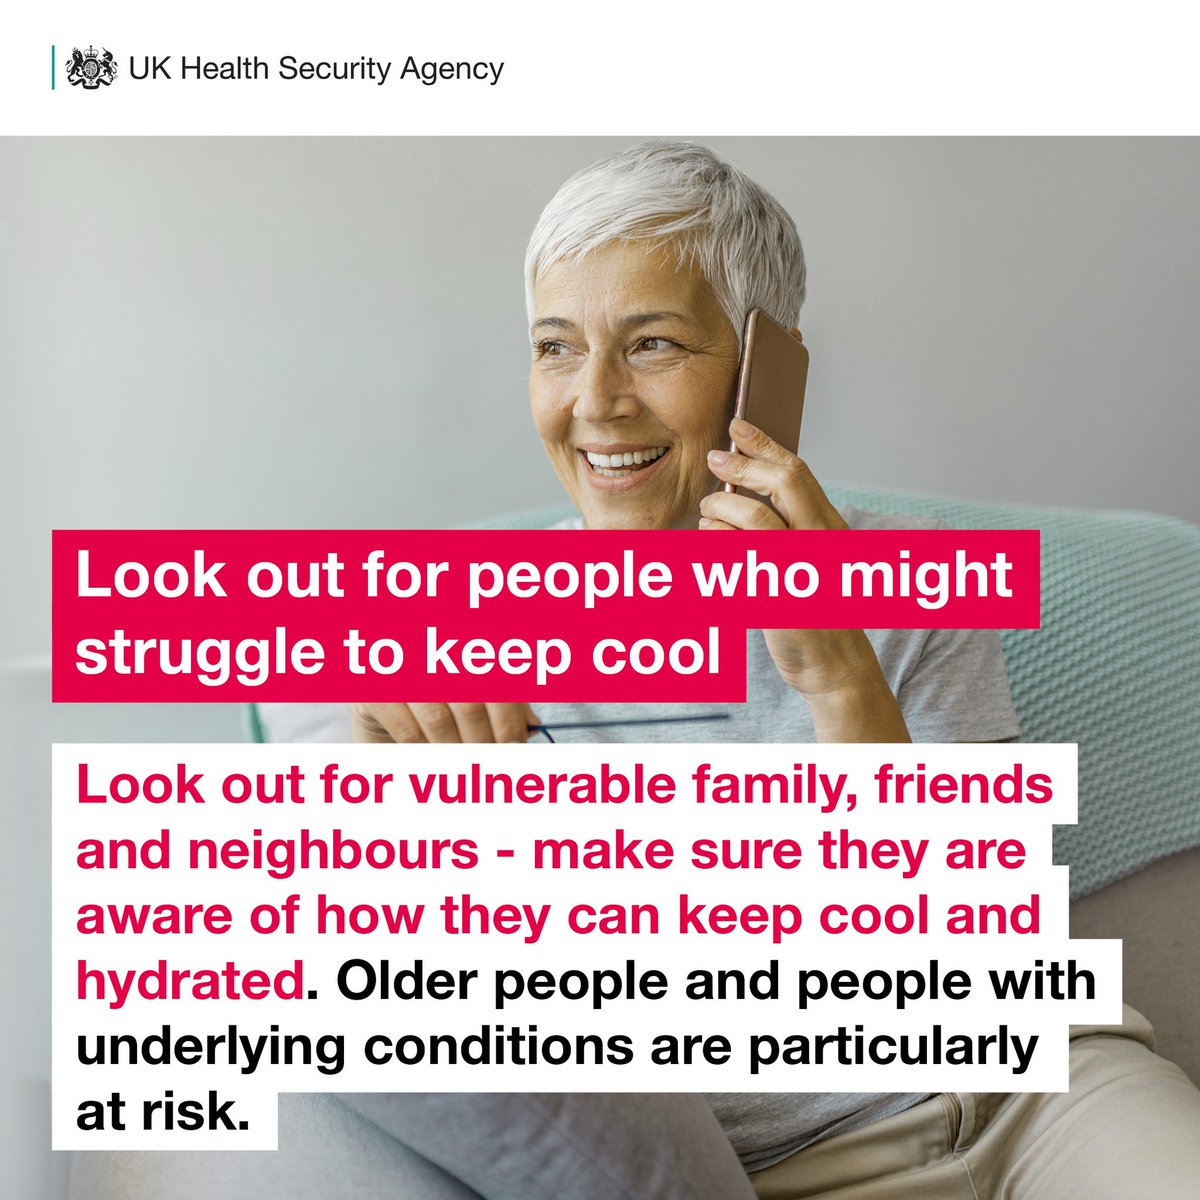 We want everyone to enjoy this warm weather safely, so it’s important to ensure that people who are vulnerable are prepared for the hot weather